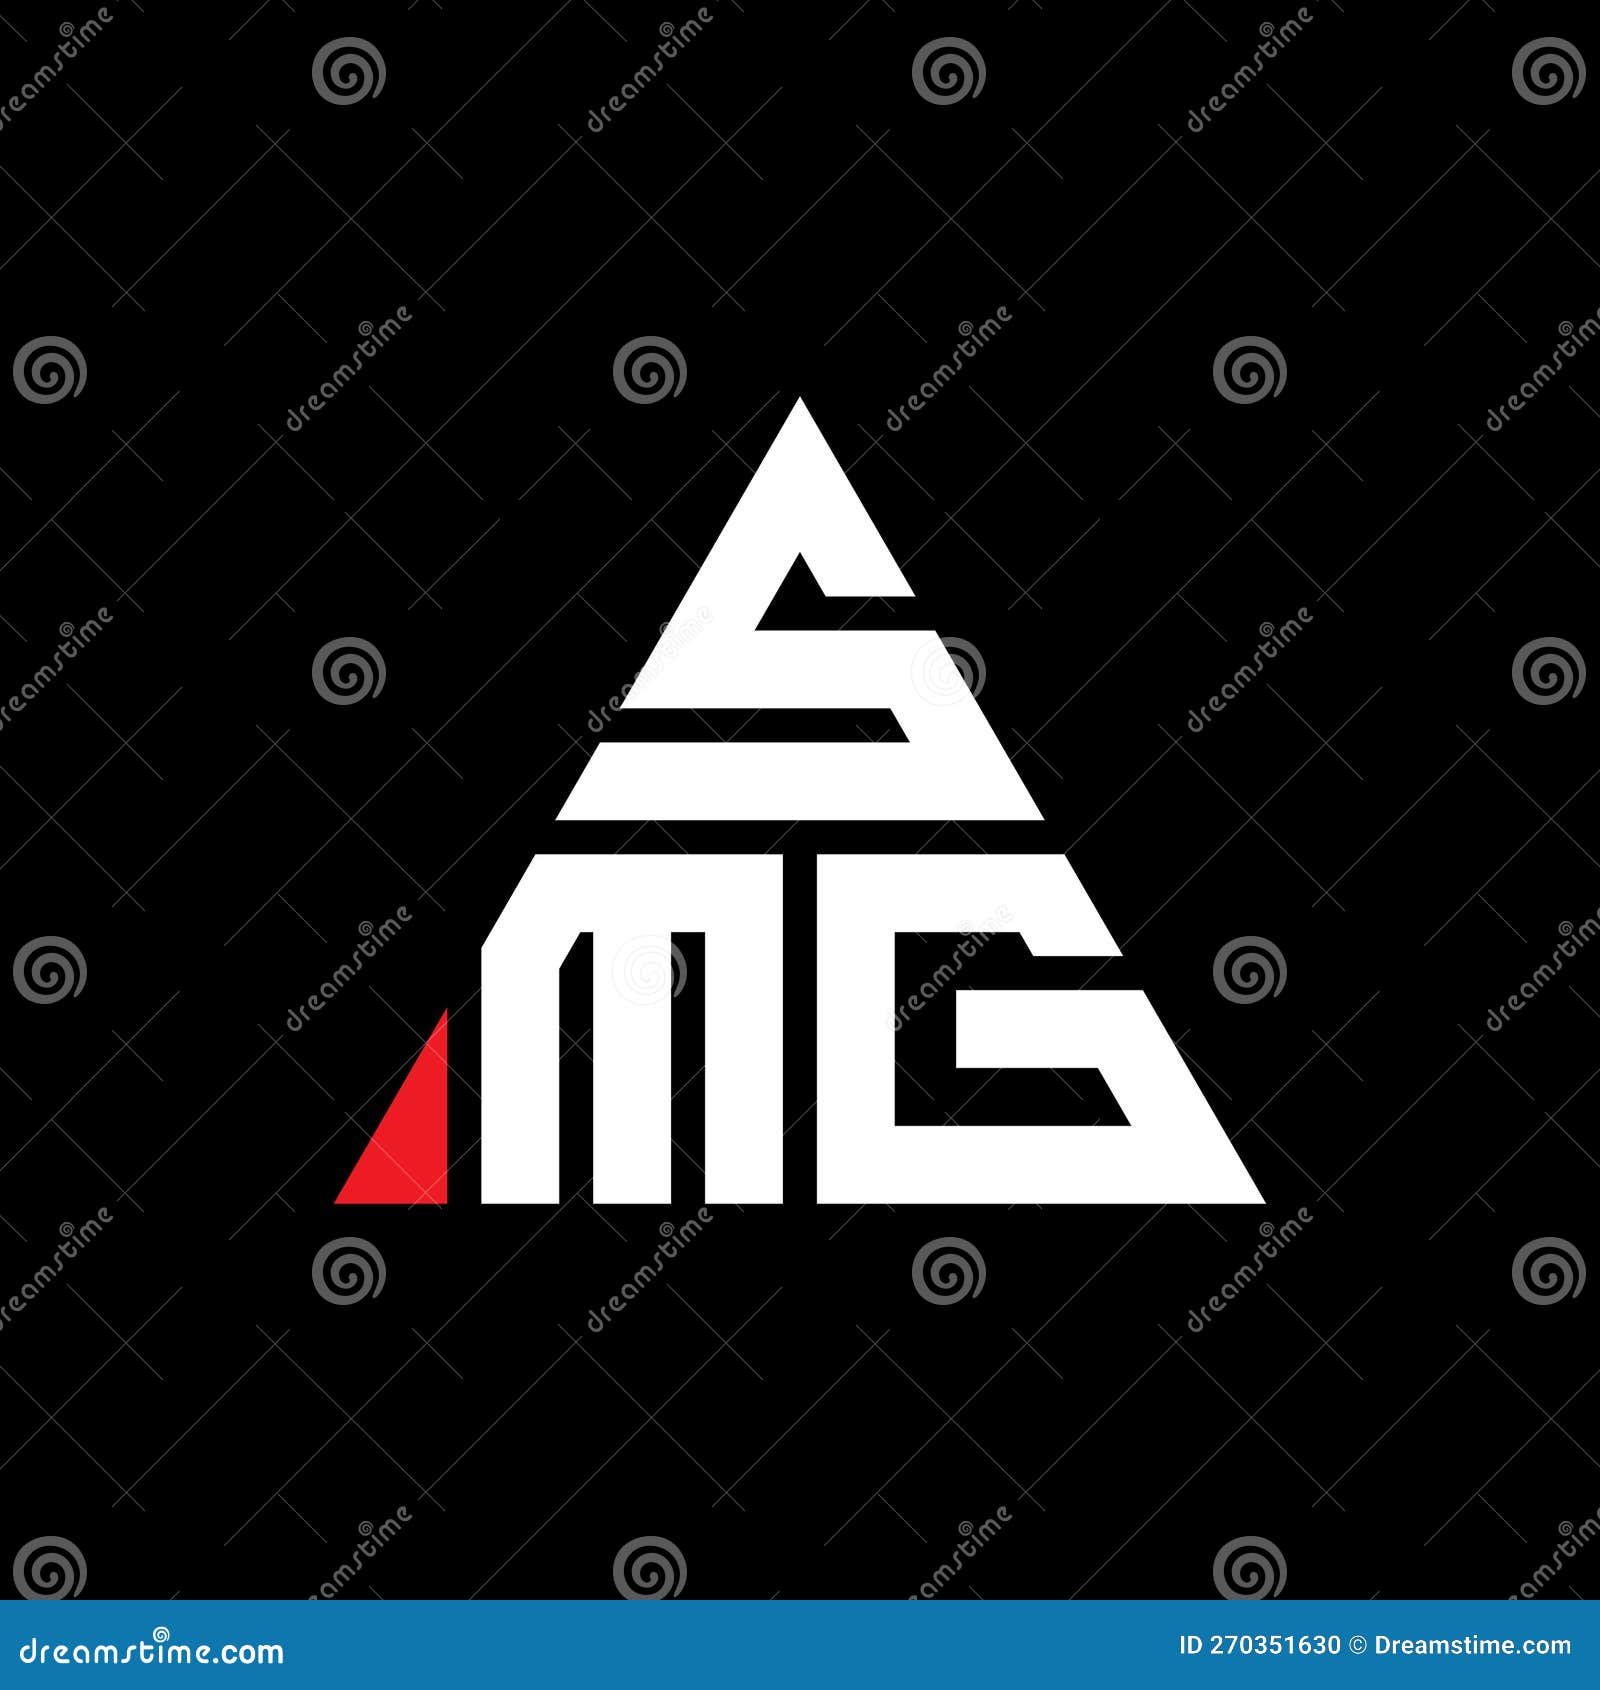 smg triangle letter logo  with triangle . smg triangle logo  monogram. smg triangle  logo template with red